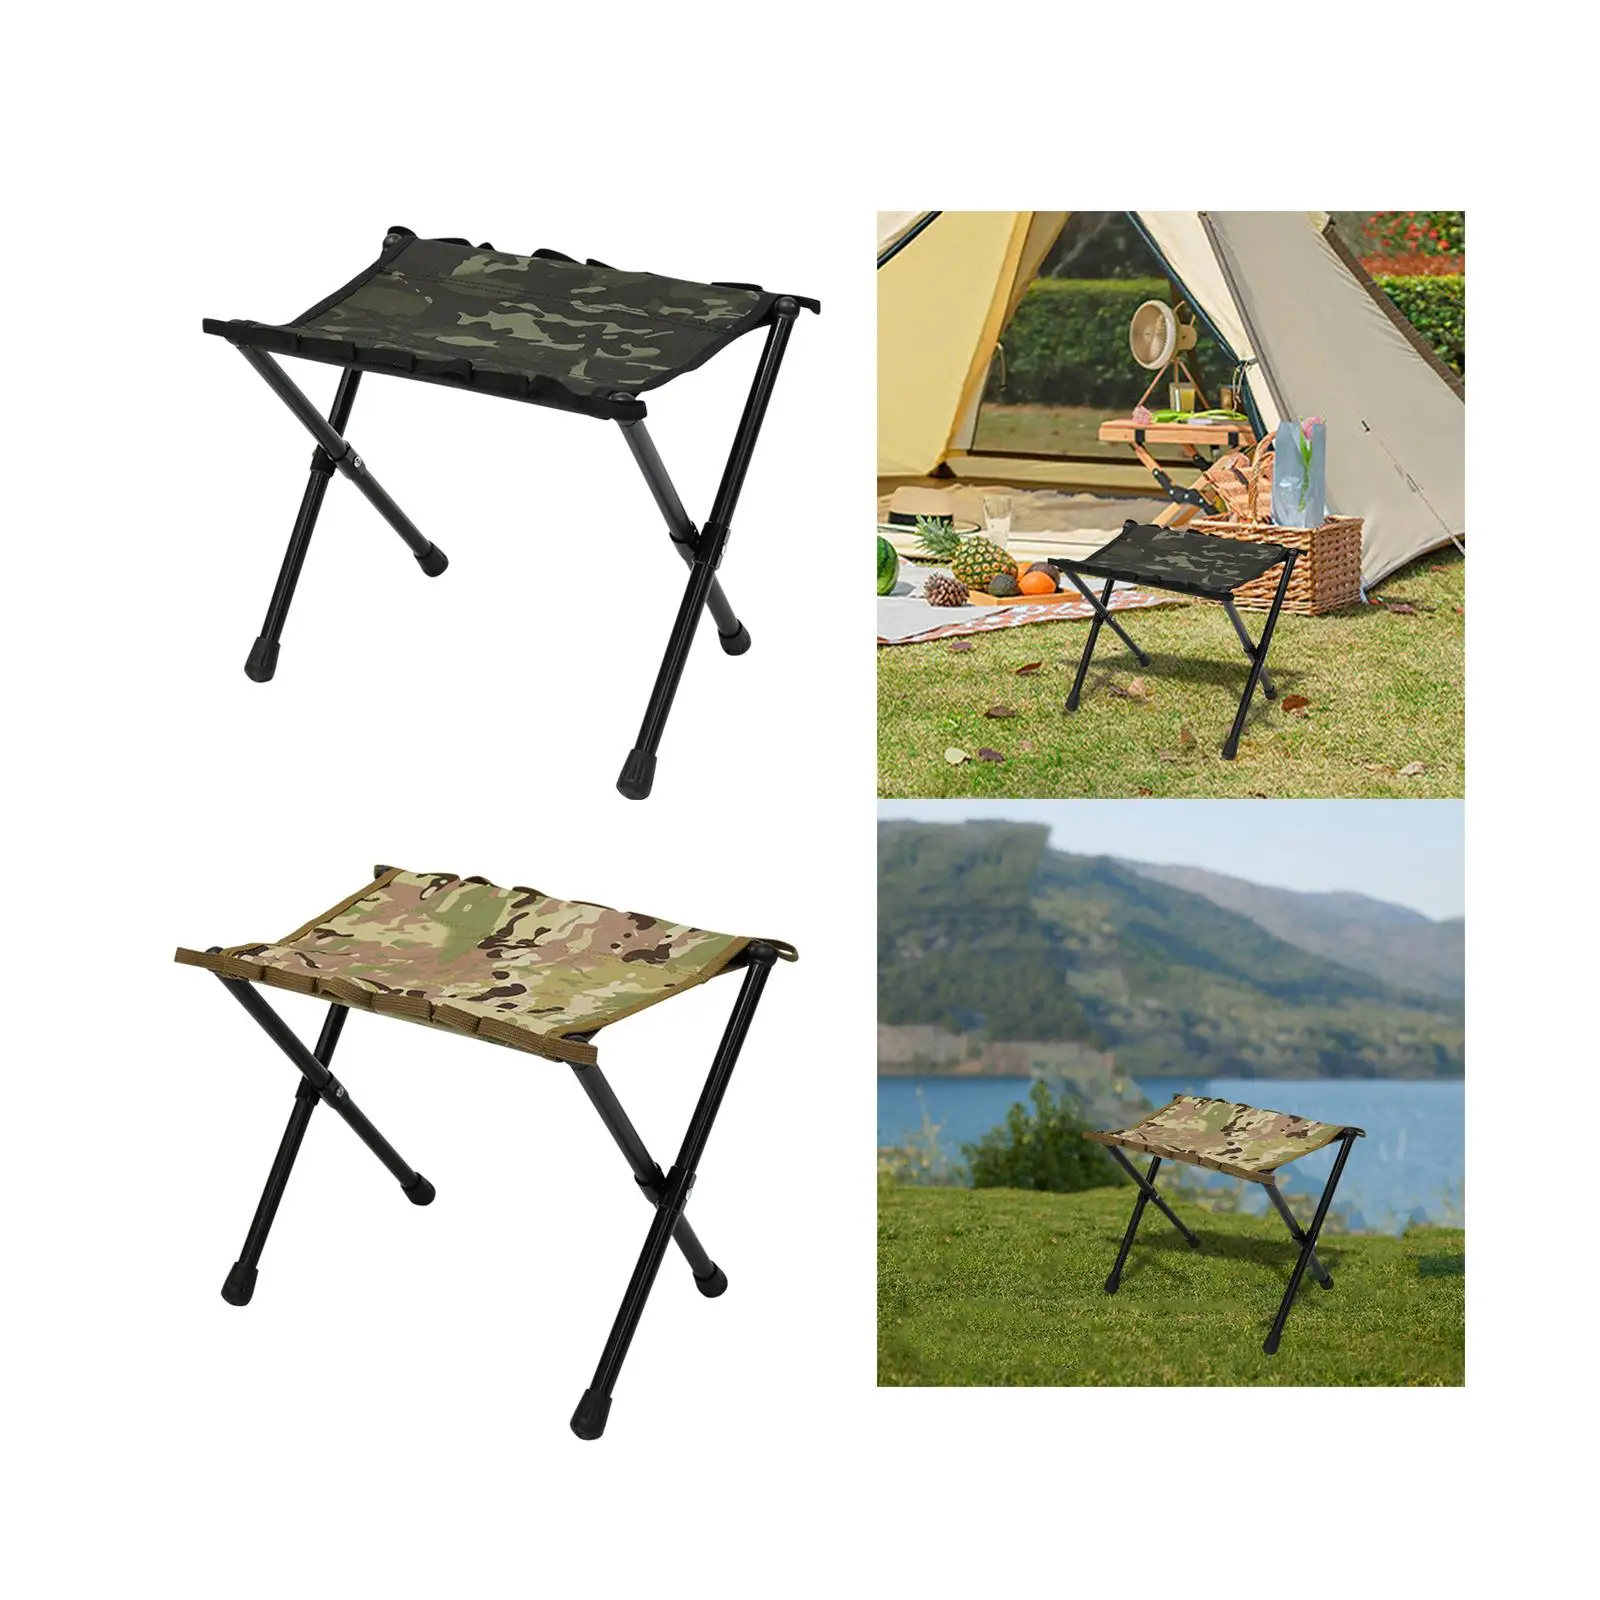 Camping Stools Folding Camp Stool Lightweight Foldable Footstool Fishing Chairs for Festival Gardening Lawn Concert Hunting